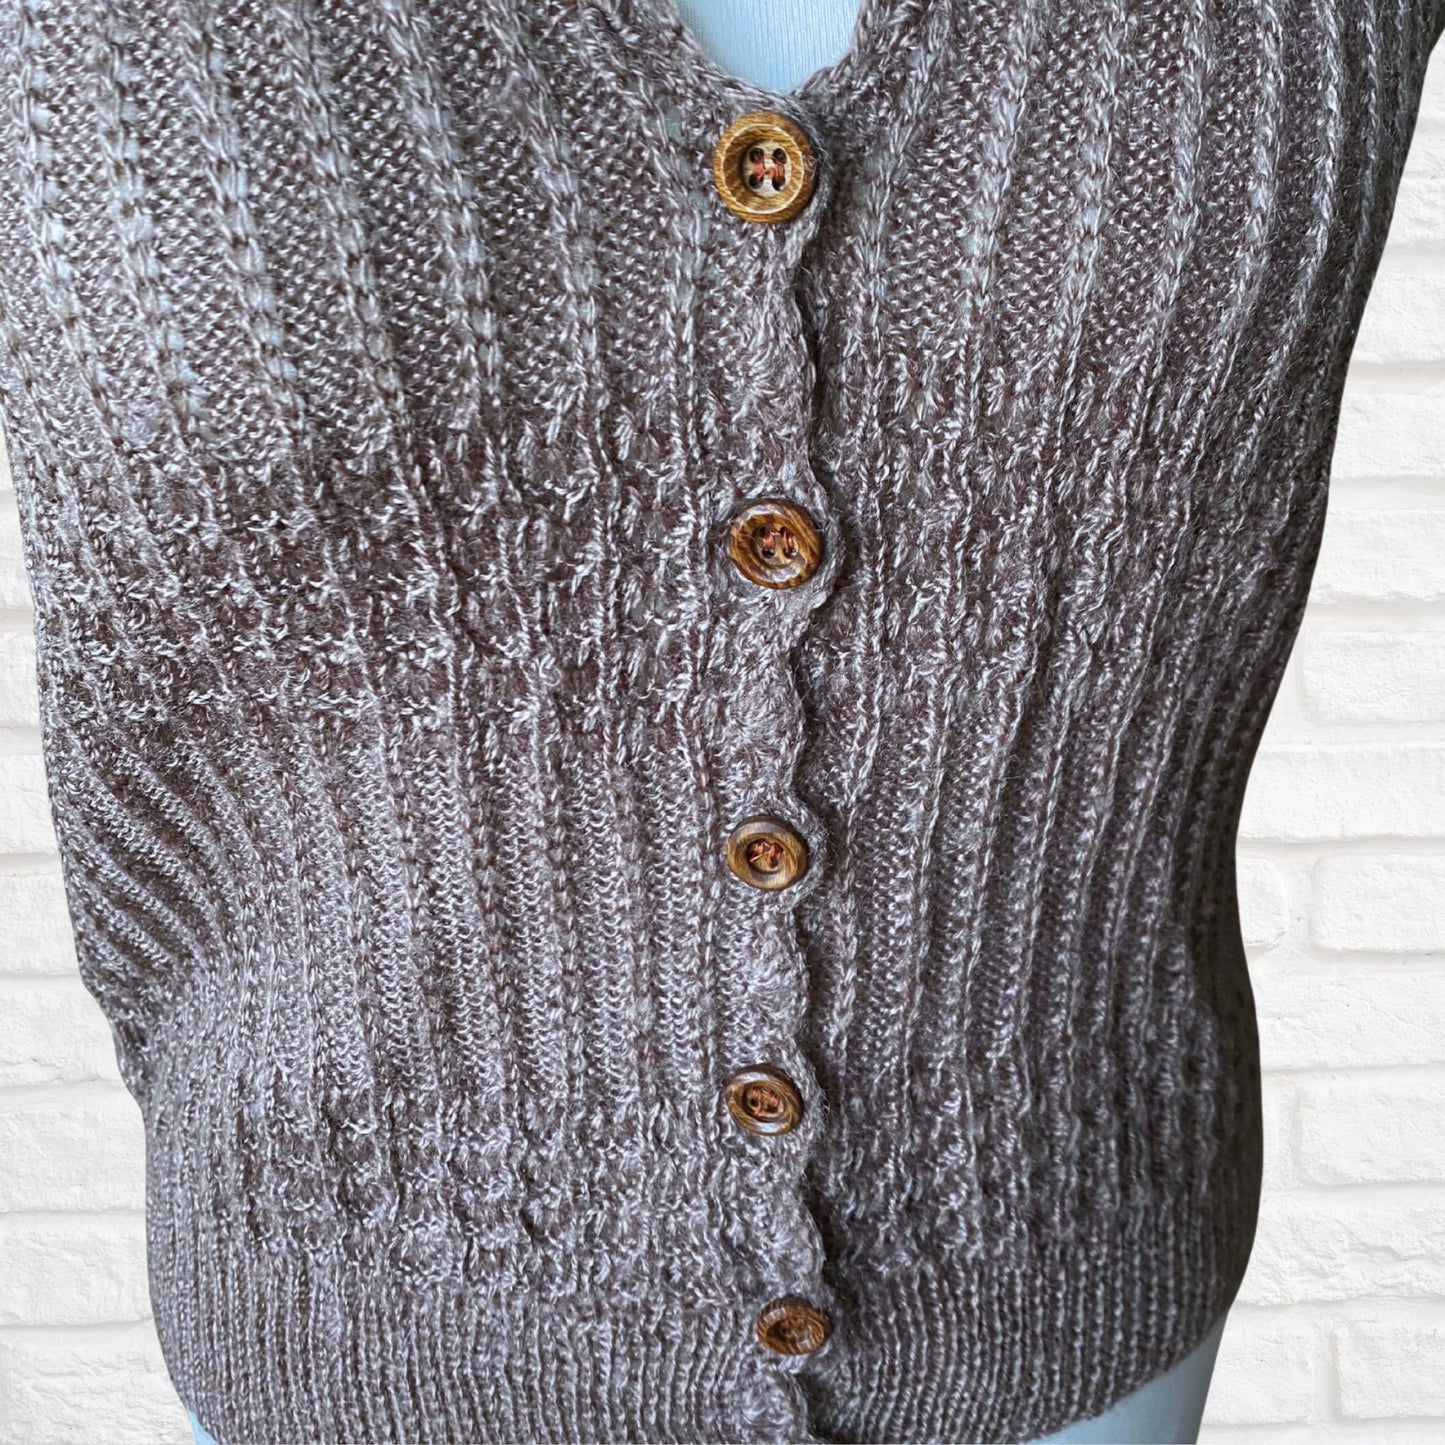 Hand Knitted Mink Brown Vintage Waistcoat with Cute Wooden Buttons.Approx UK size 8-10